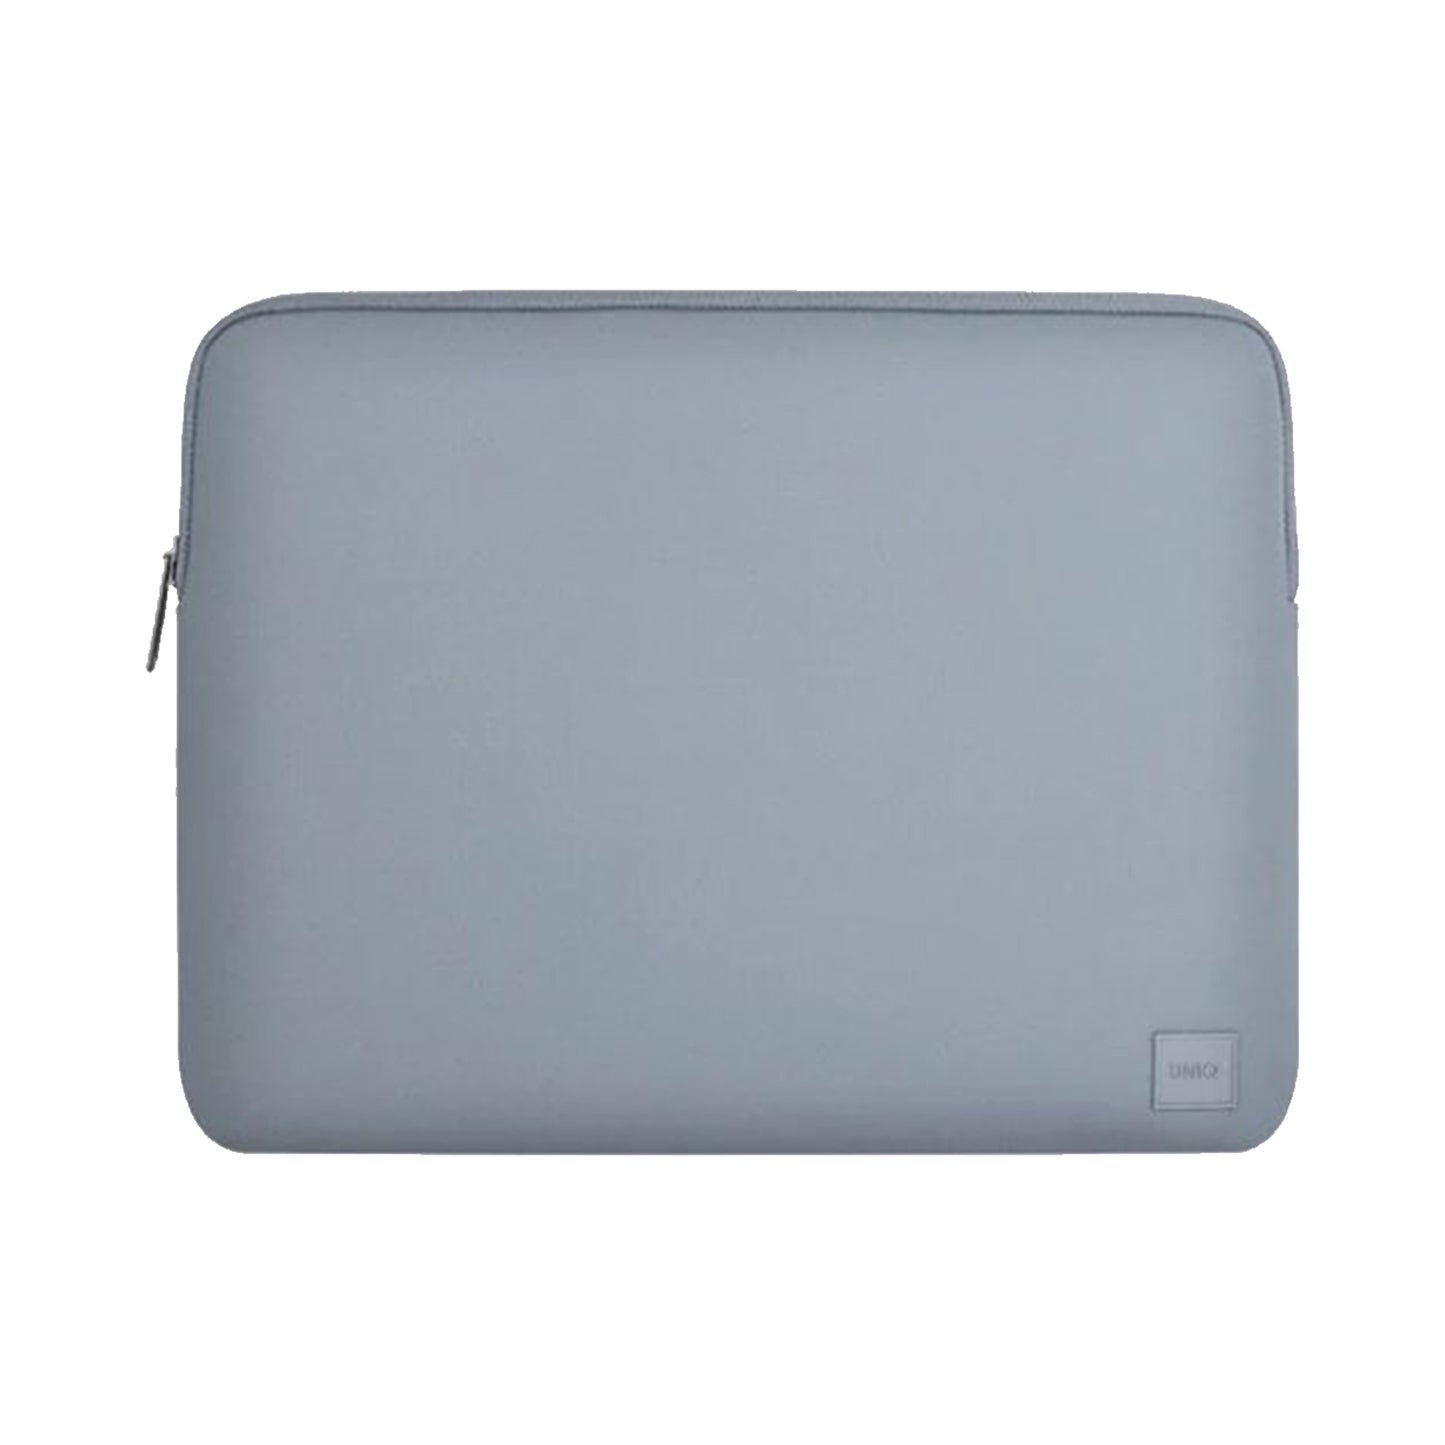 UNIQ Cyprus Laptop and Tablet Sleeve - Water Resistant Neoprene Up to 14" - 14 inch - Steel Blue ( Barcode: 8886463680759 )